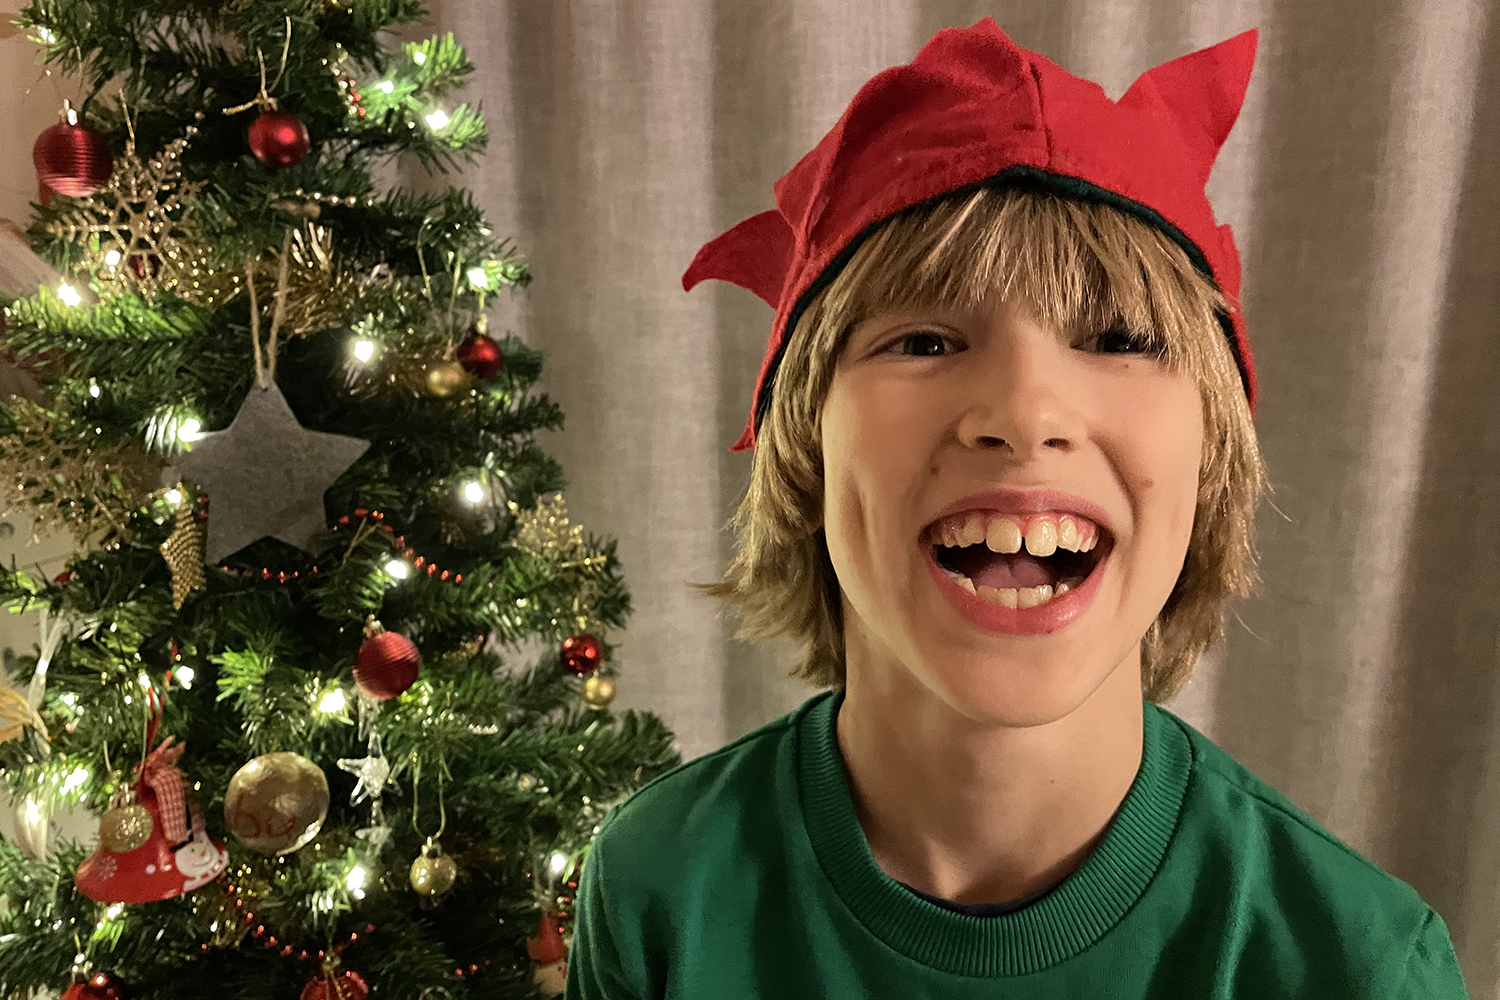 Toby wearing an elf hat and laughing in front of the Christmas tree